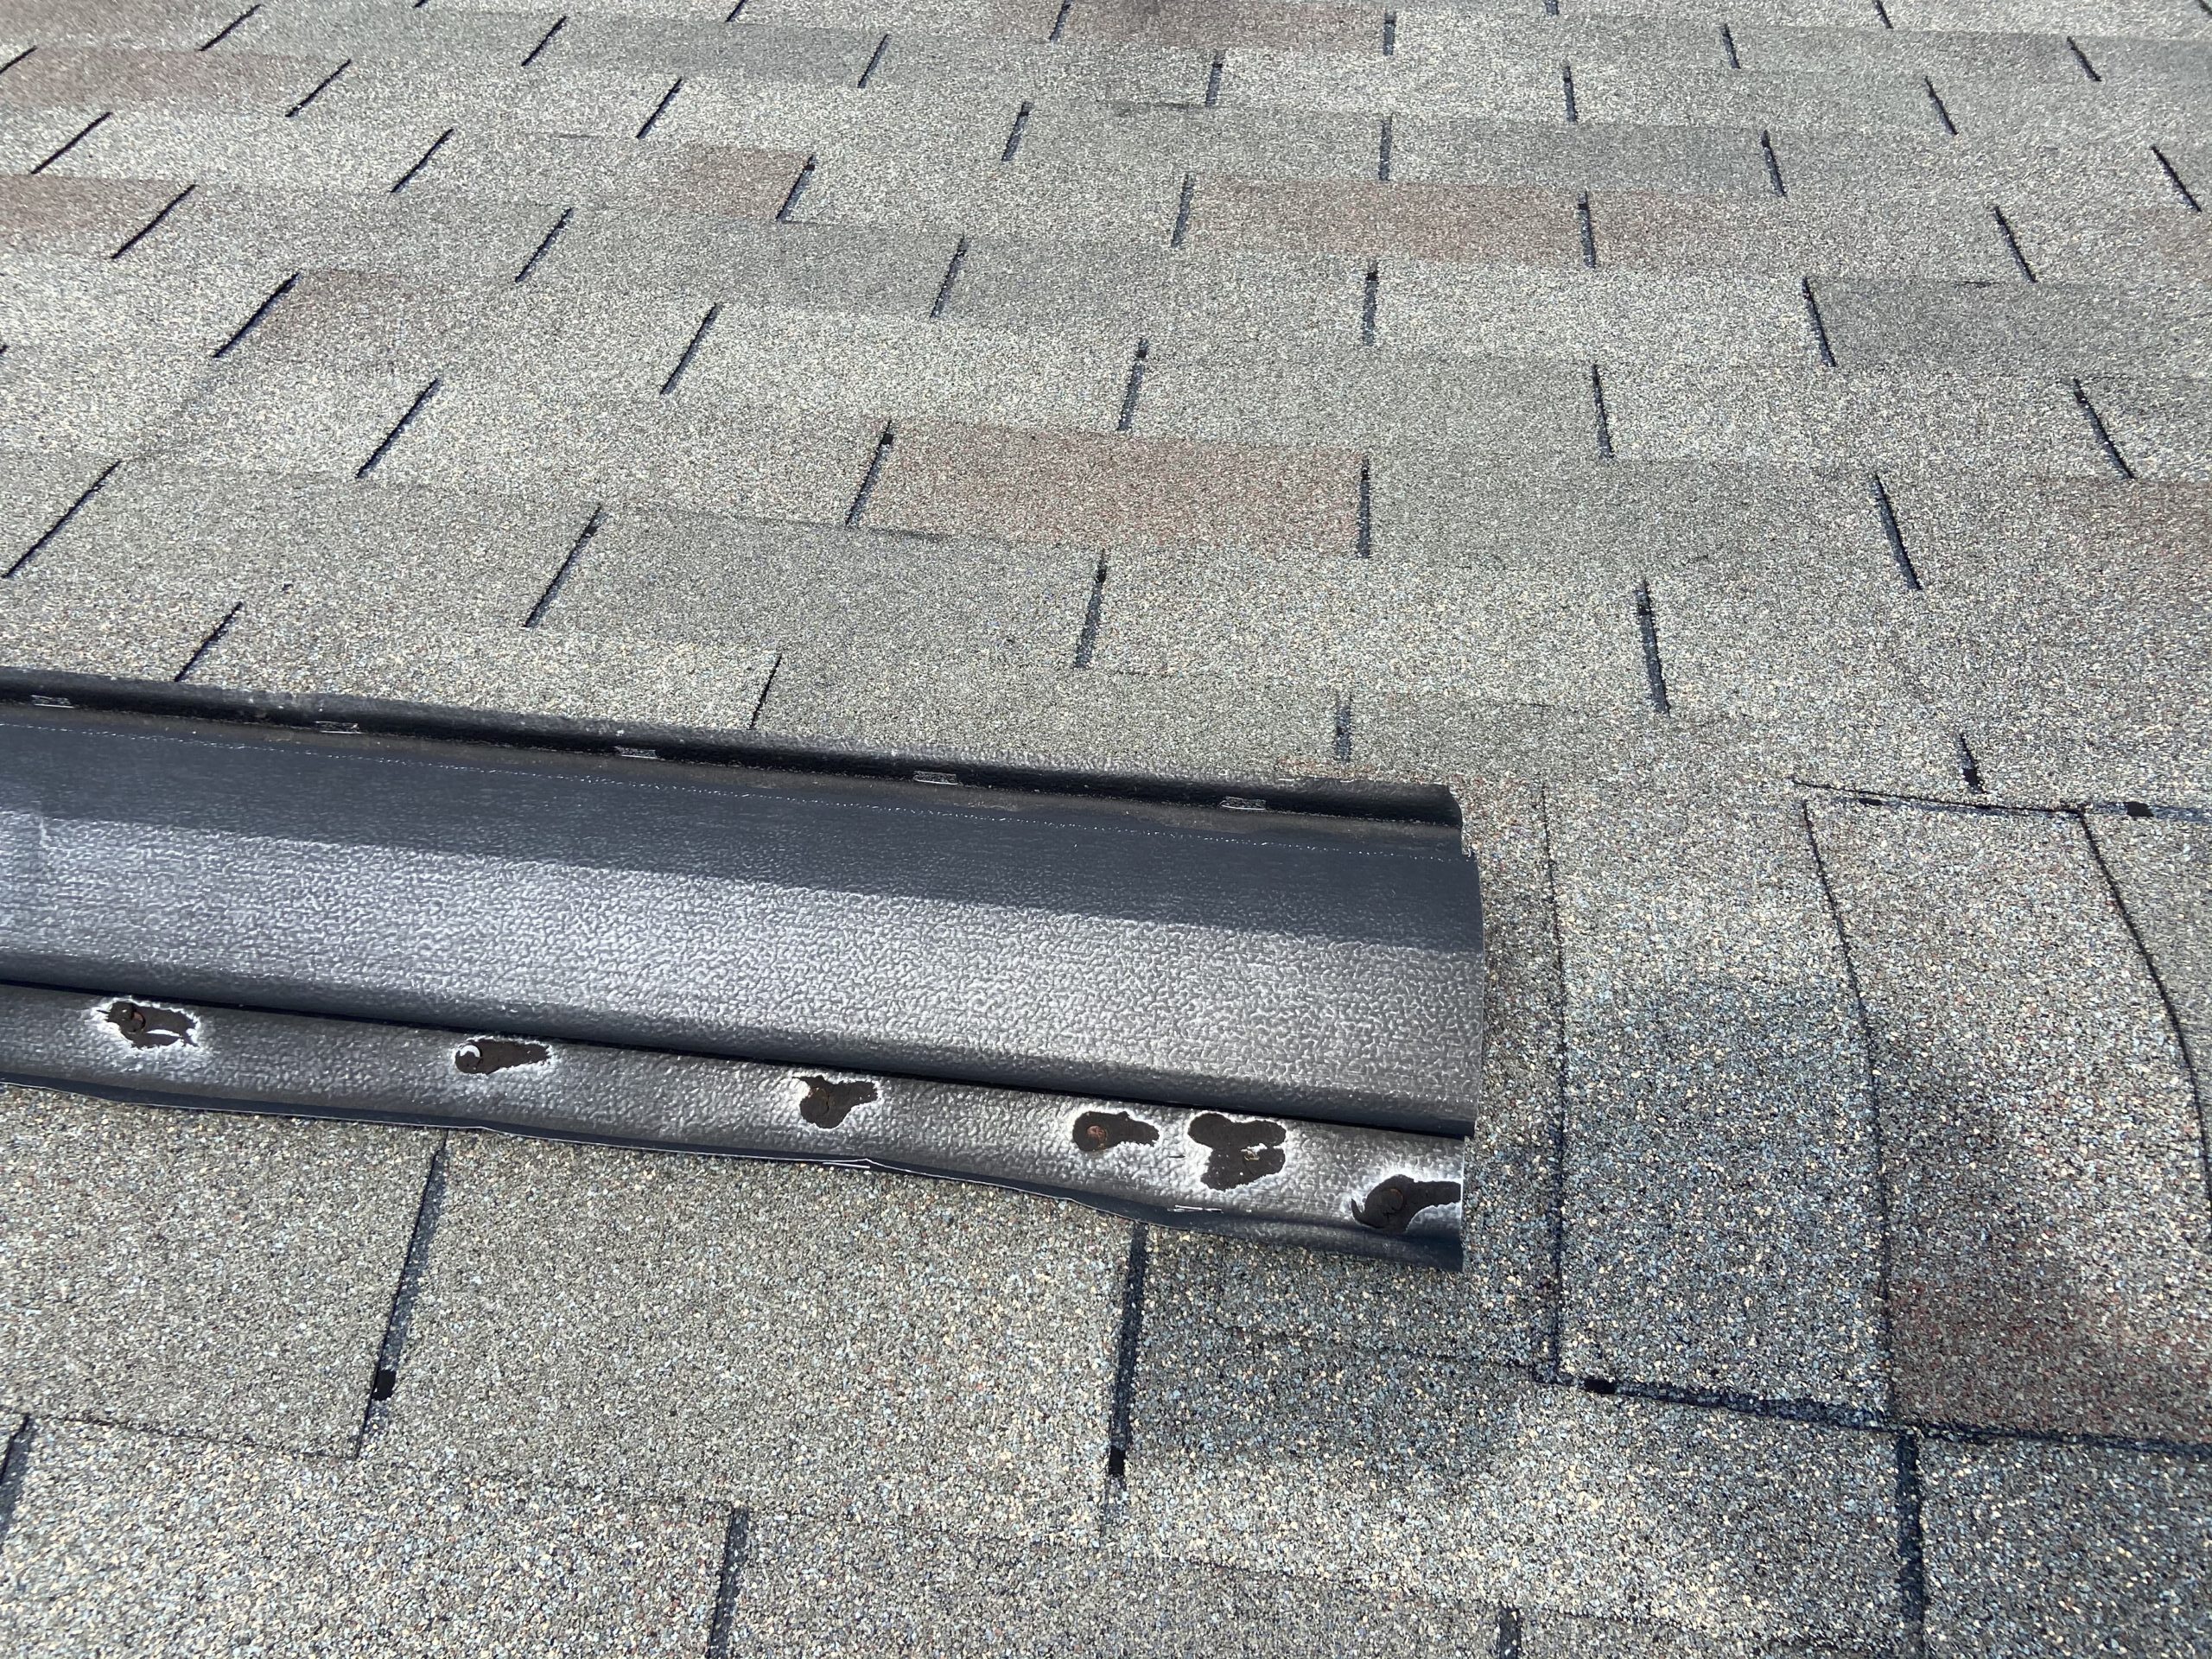 this is a picture of an old metal ridge vent on a roof, these ridge vents have bad problem with causing roof leaks